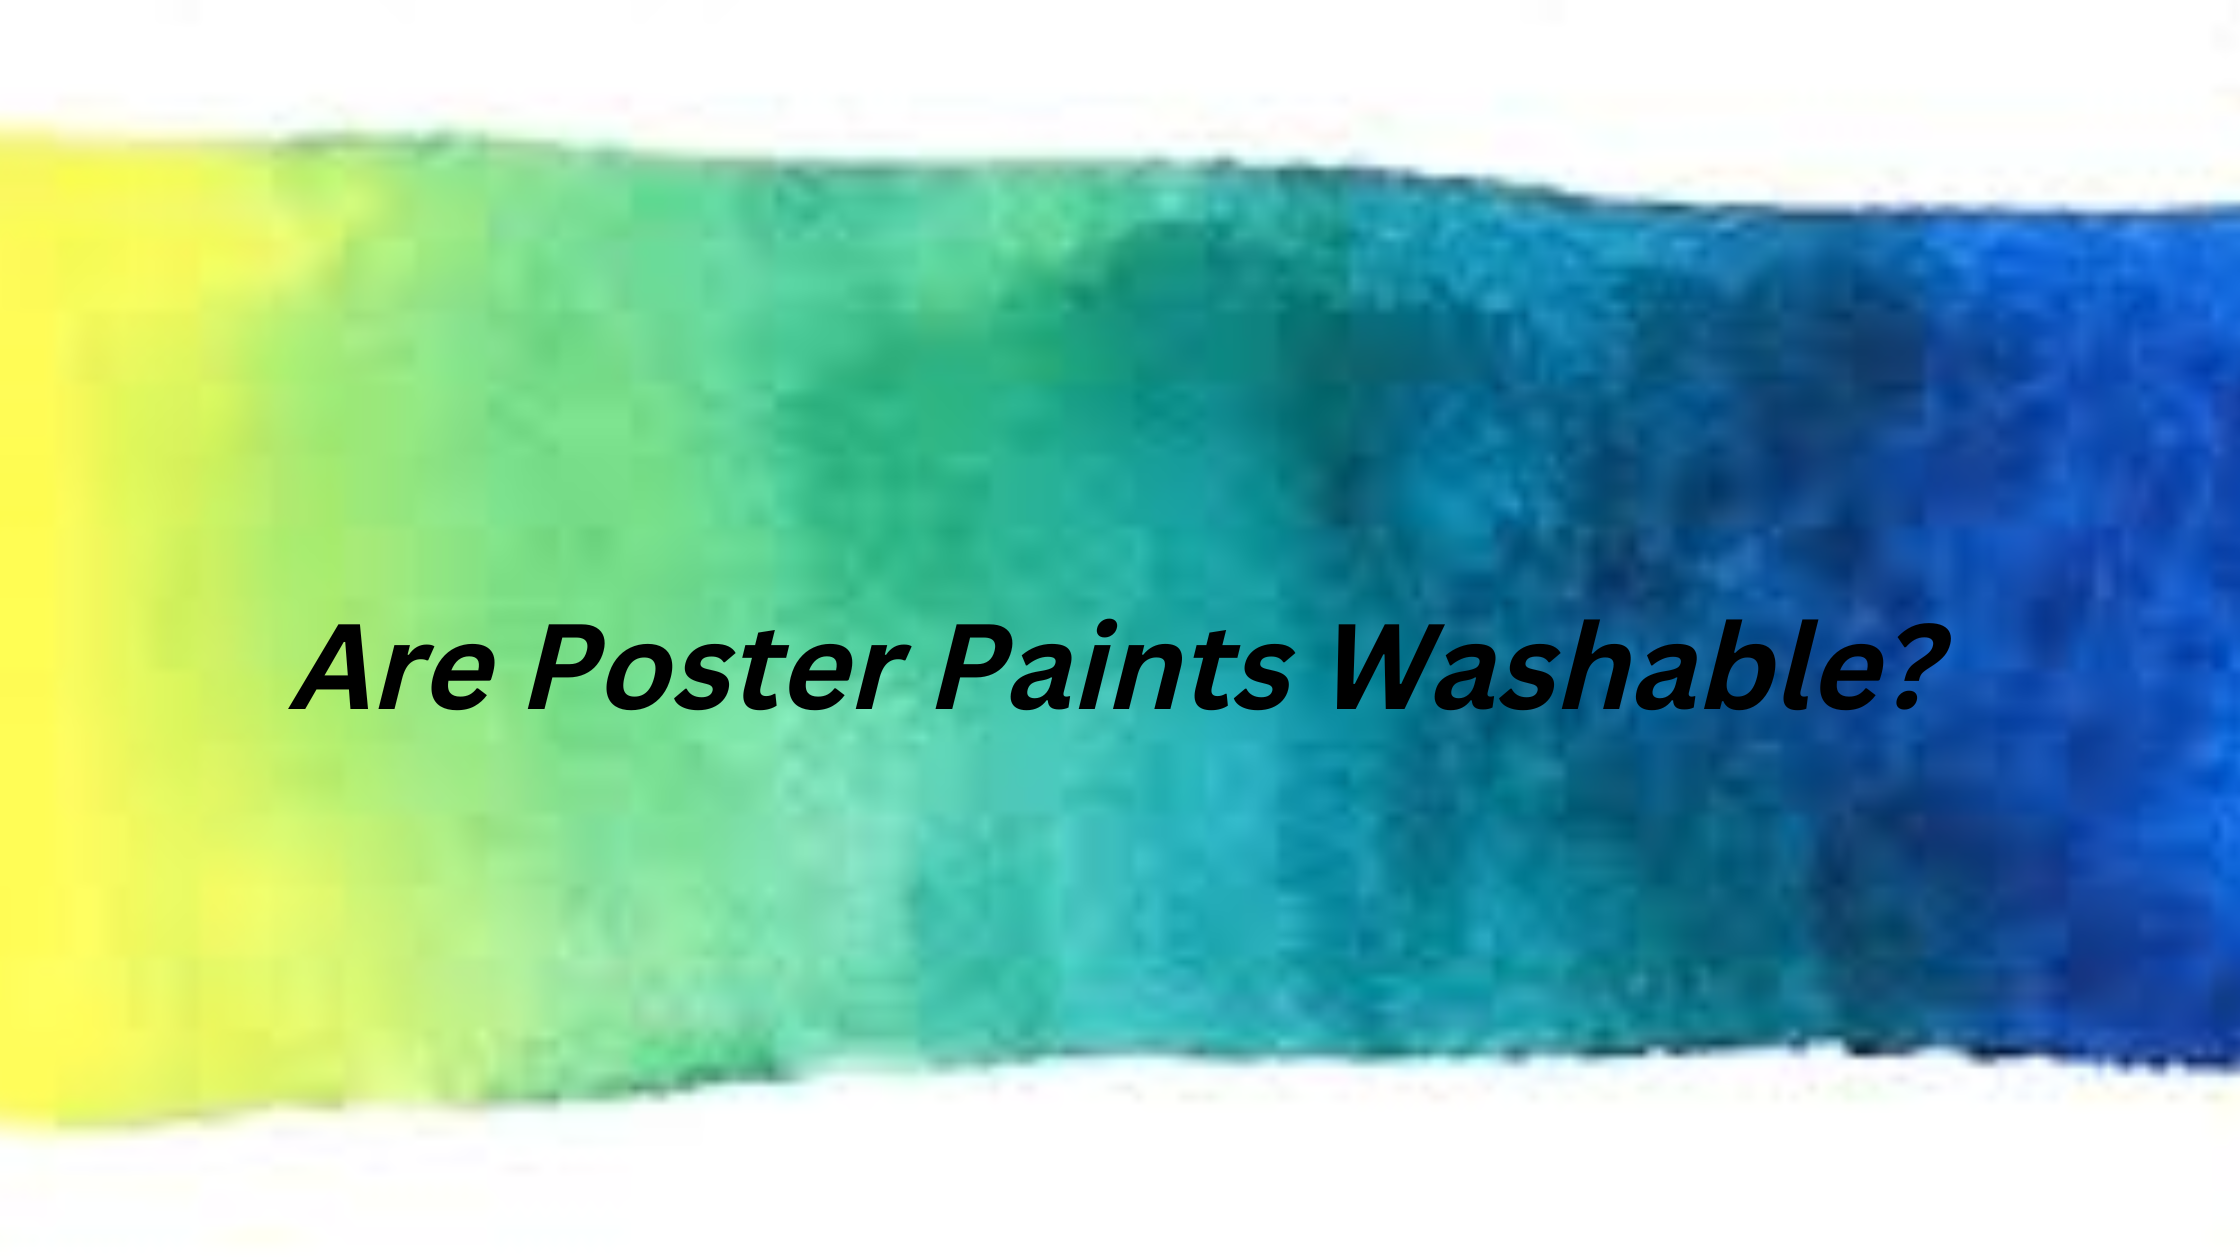 Are Poster Paints Washable?